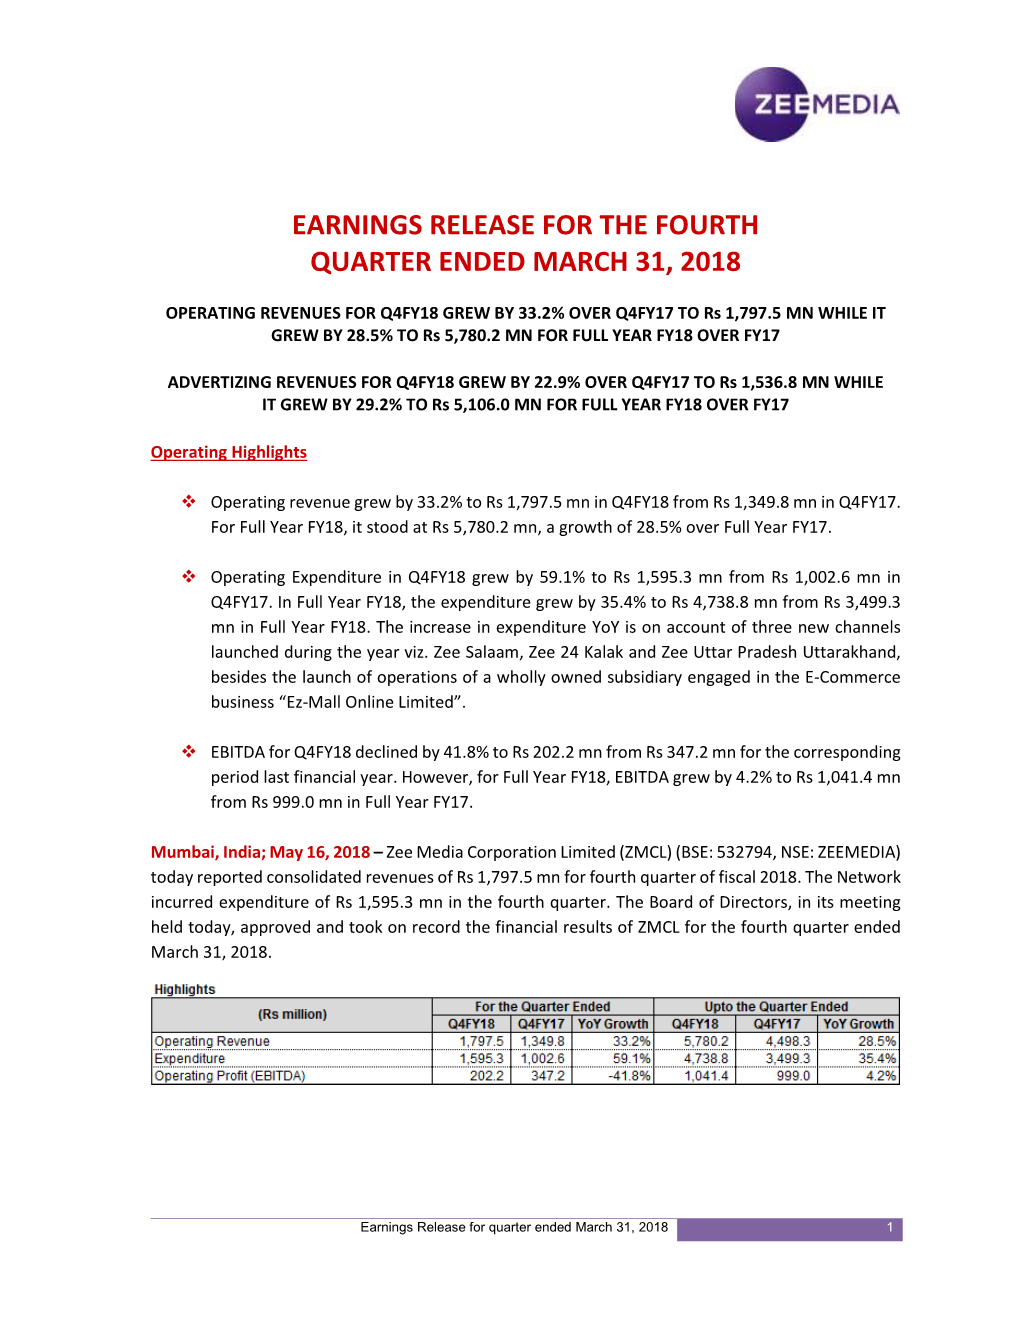 Earnings Release for the Fourth Quarter Ended March 31, 2018